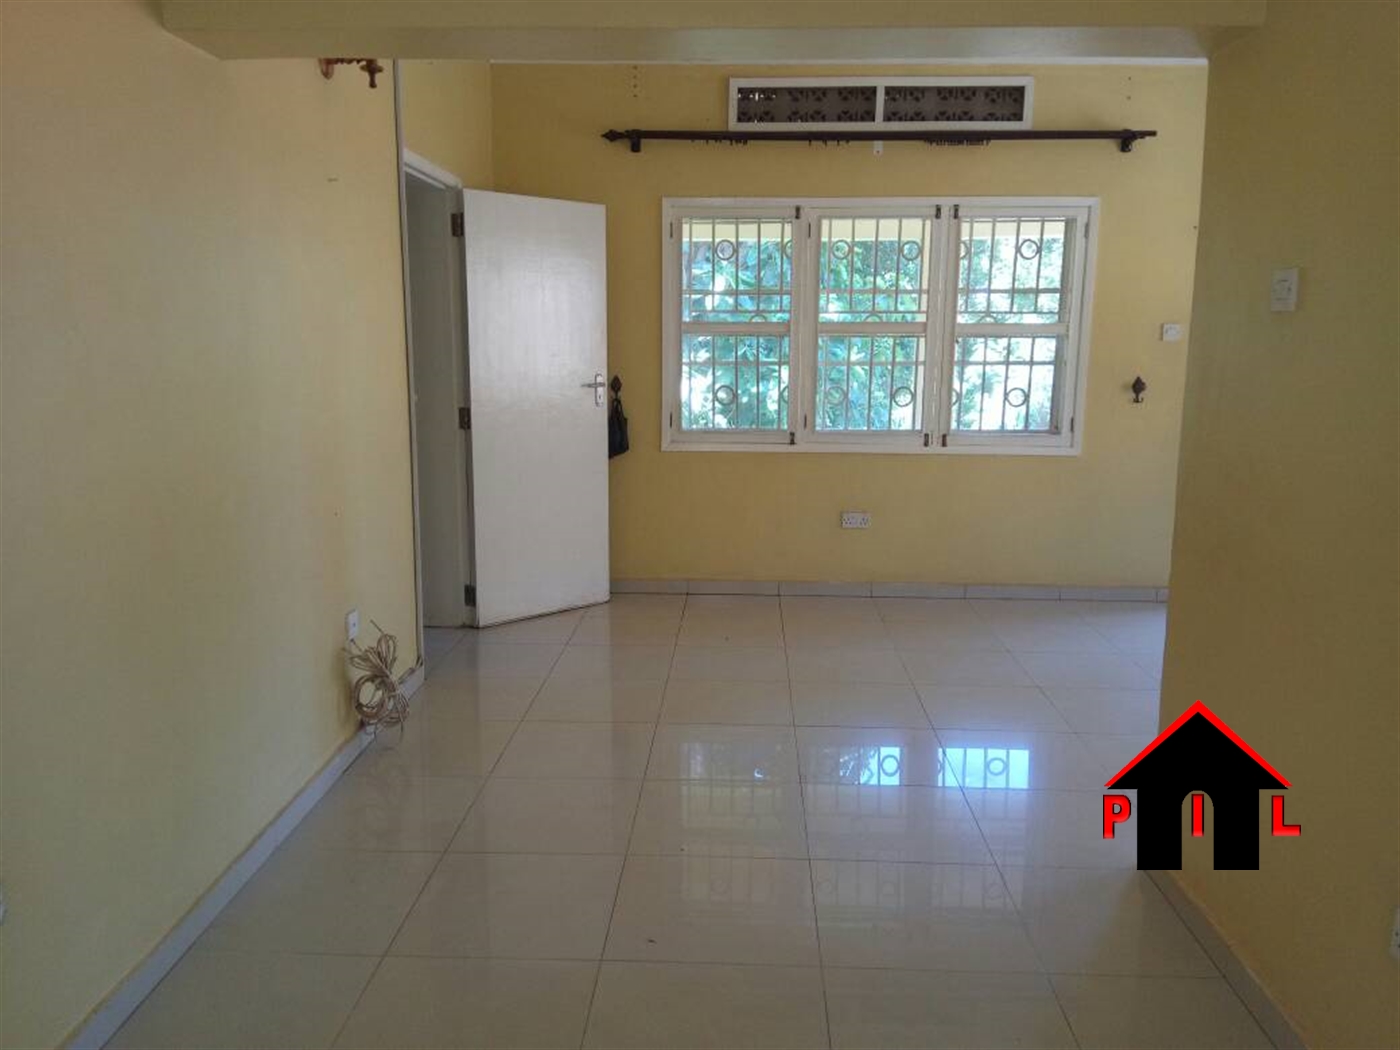 Mansion for rent in Bbunga Wakiso